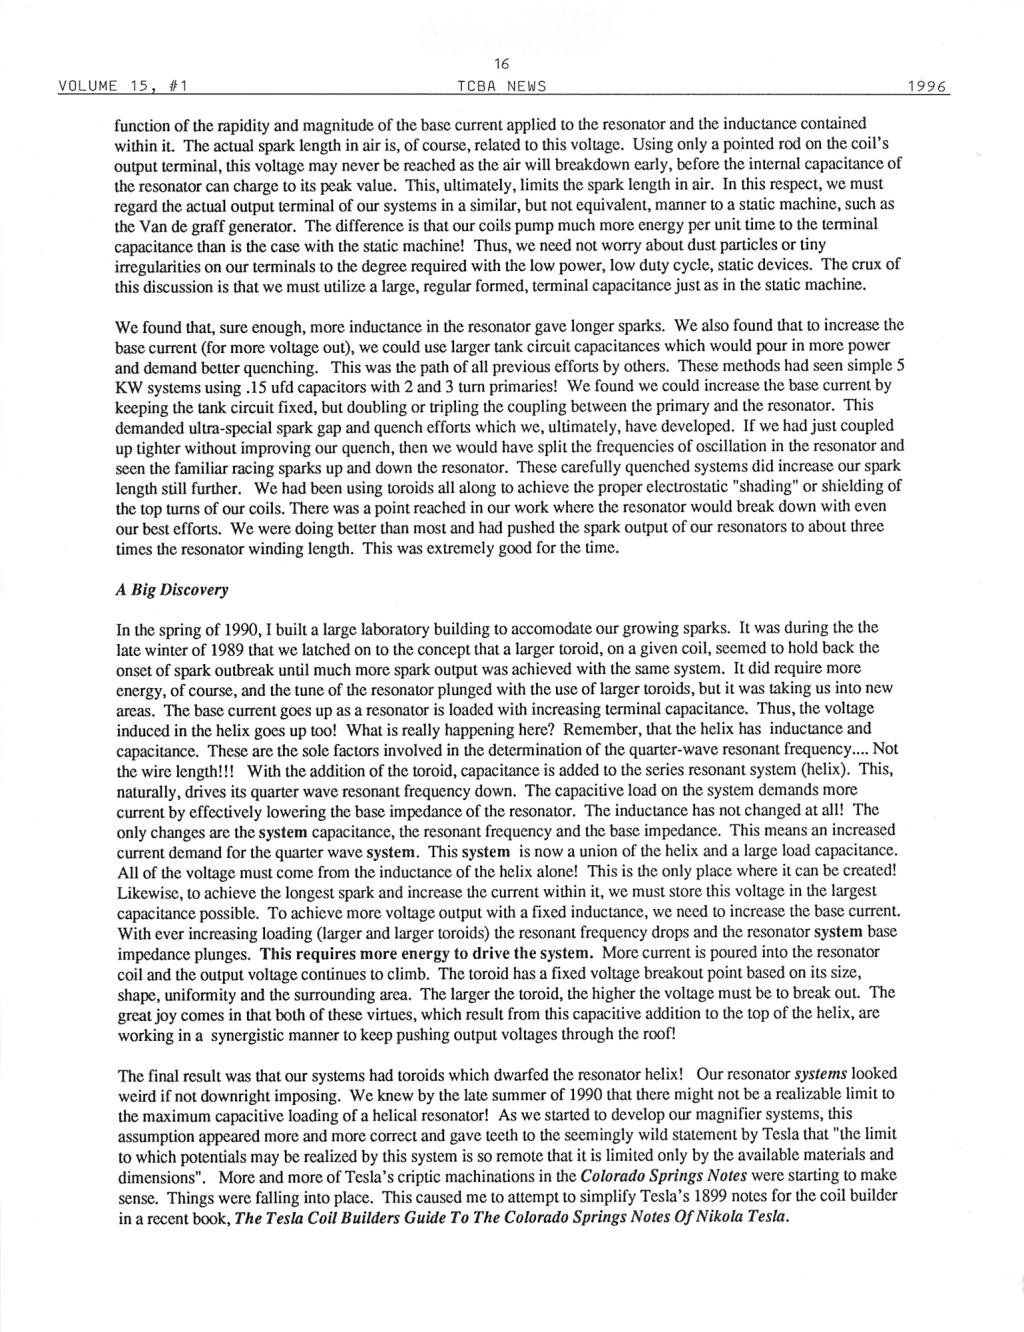 TCBA Volume 15 - Issue 1 - Page 16 of 18